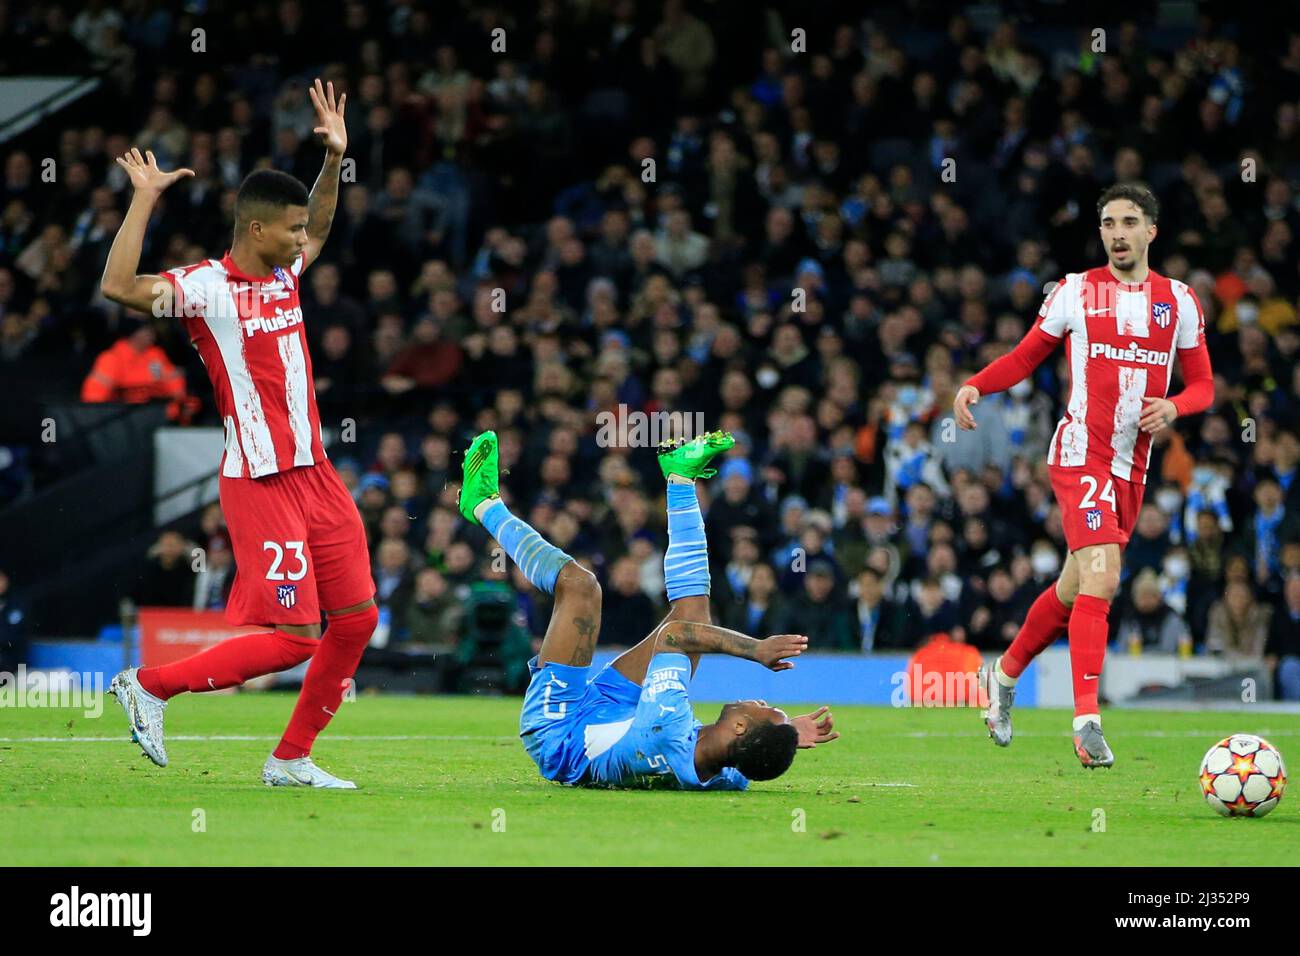 Raheem Sterling #7 of Manchester City  falls in the penalty area after a challenge by Reinildo Mandava #23 of Athletico Madrid but no penalty is given Stock Photo